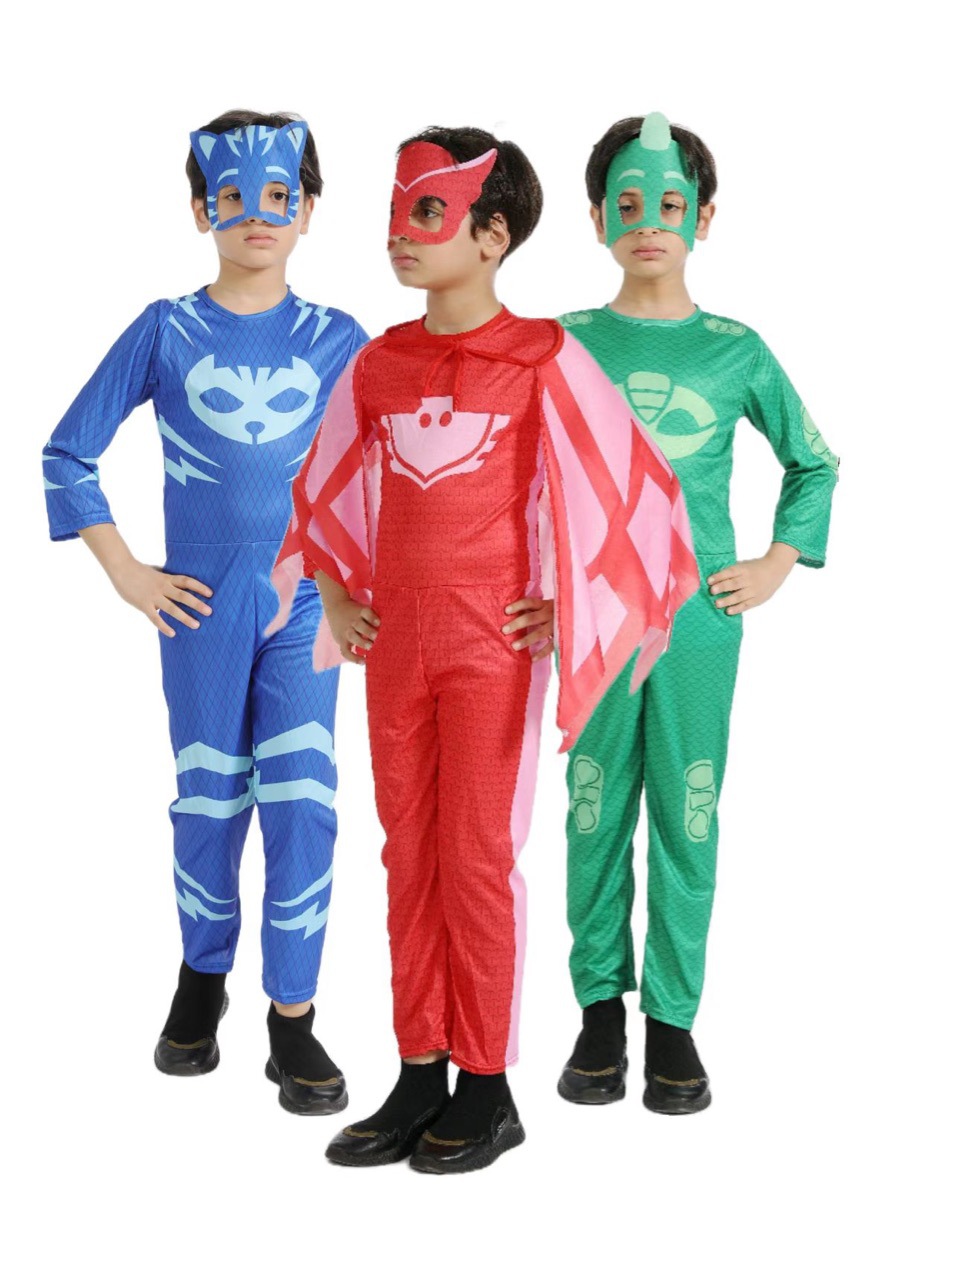 PJ Masks Movies Cosplay Costumes Red Green Blue Animated Superhero Pajamas Suits For Children